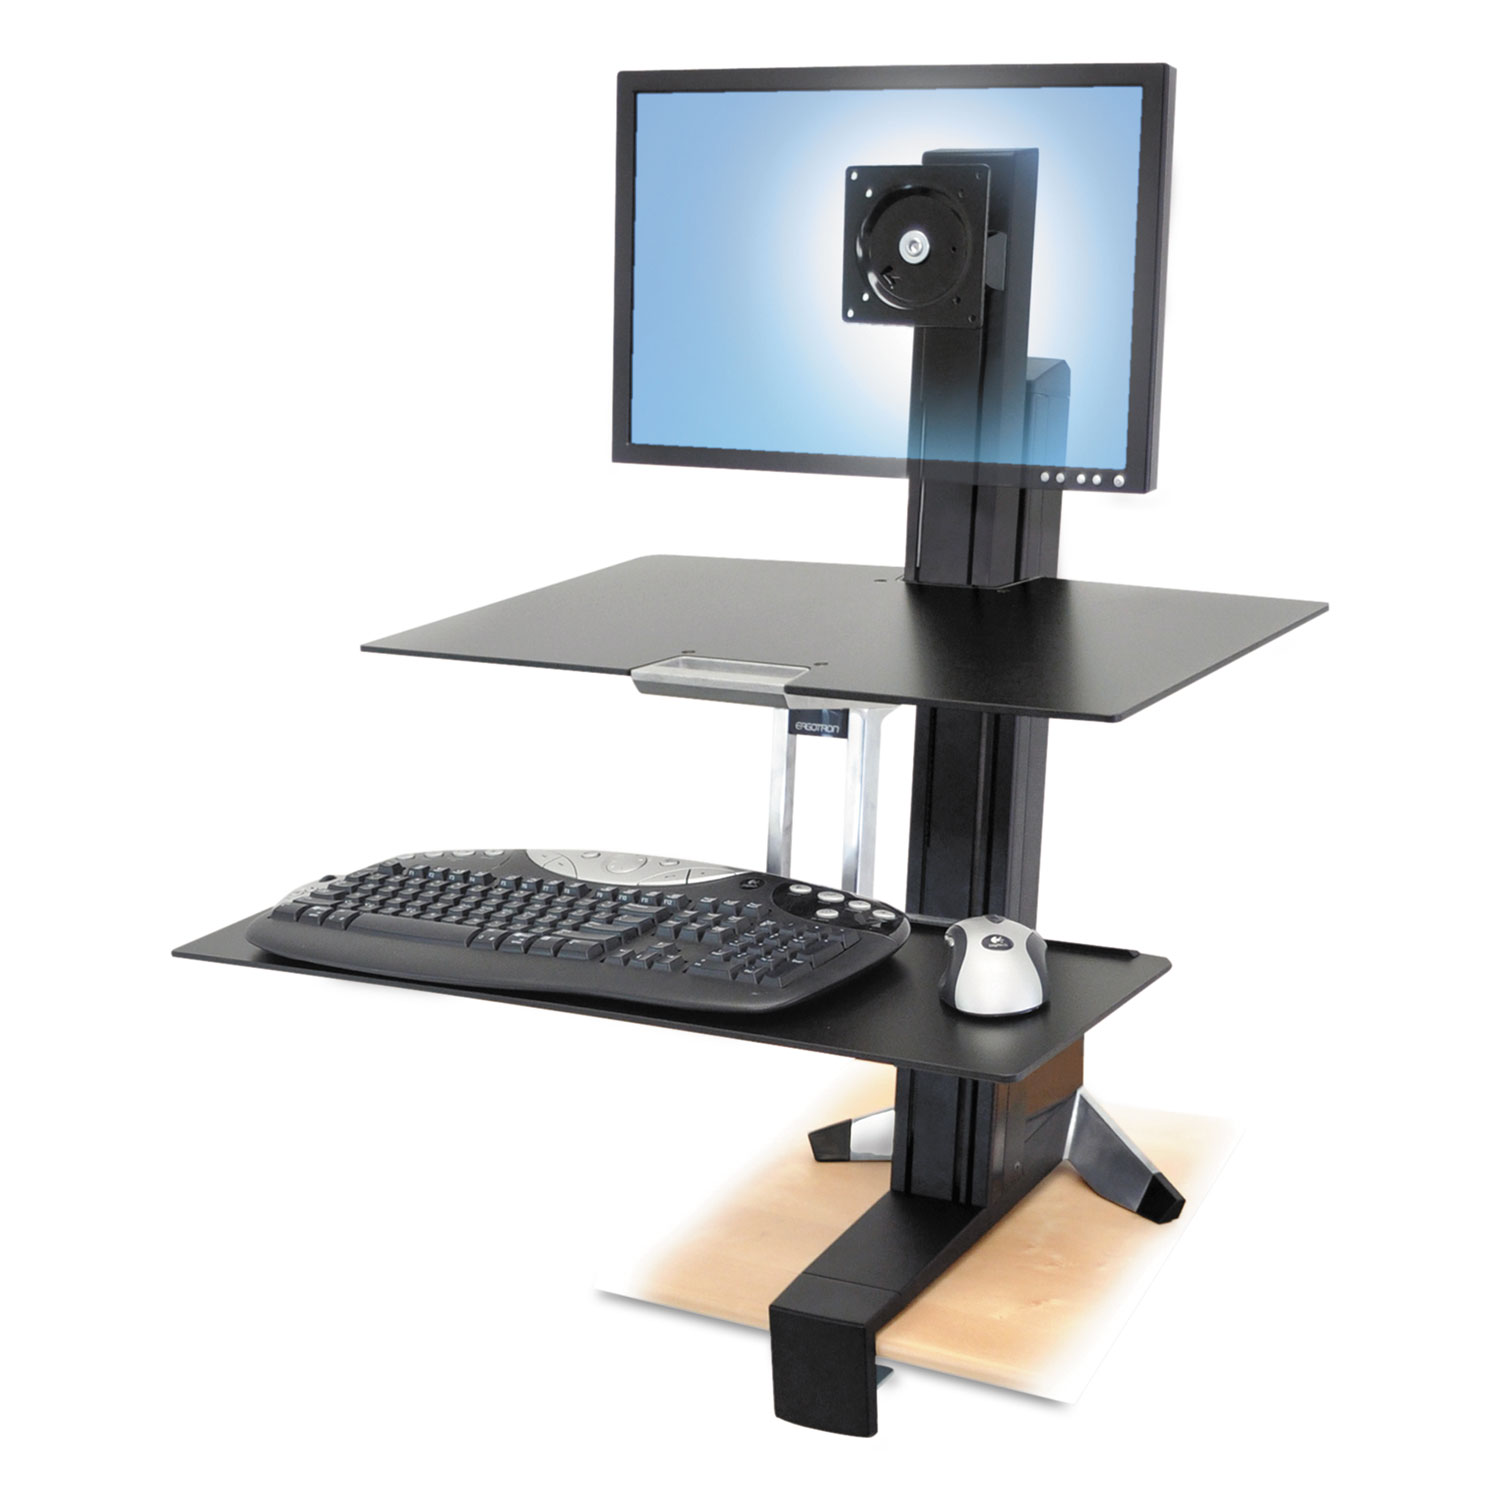  WorkFit by Ergotron 33-350-200 WorkFit-S Sit-Stand Workstation with Worksurface, LCD LD Monitor, Aluminum/Black (ERG33350200) 